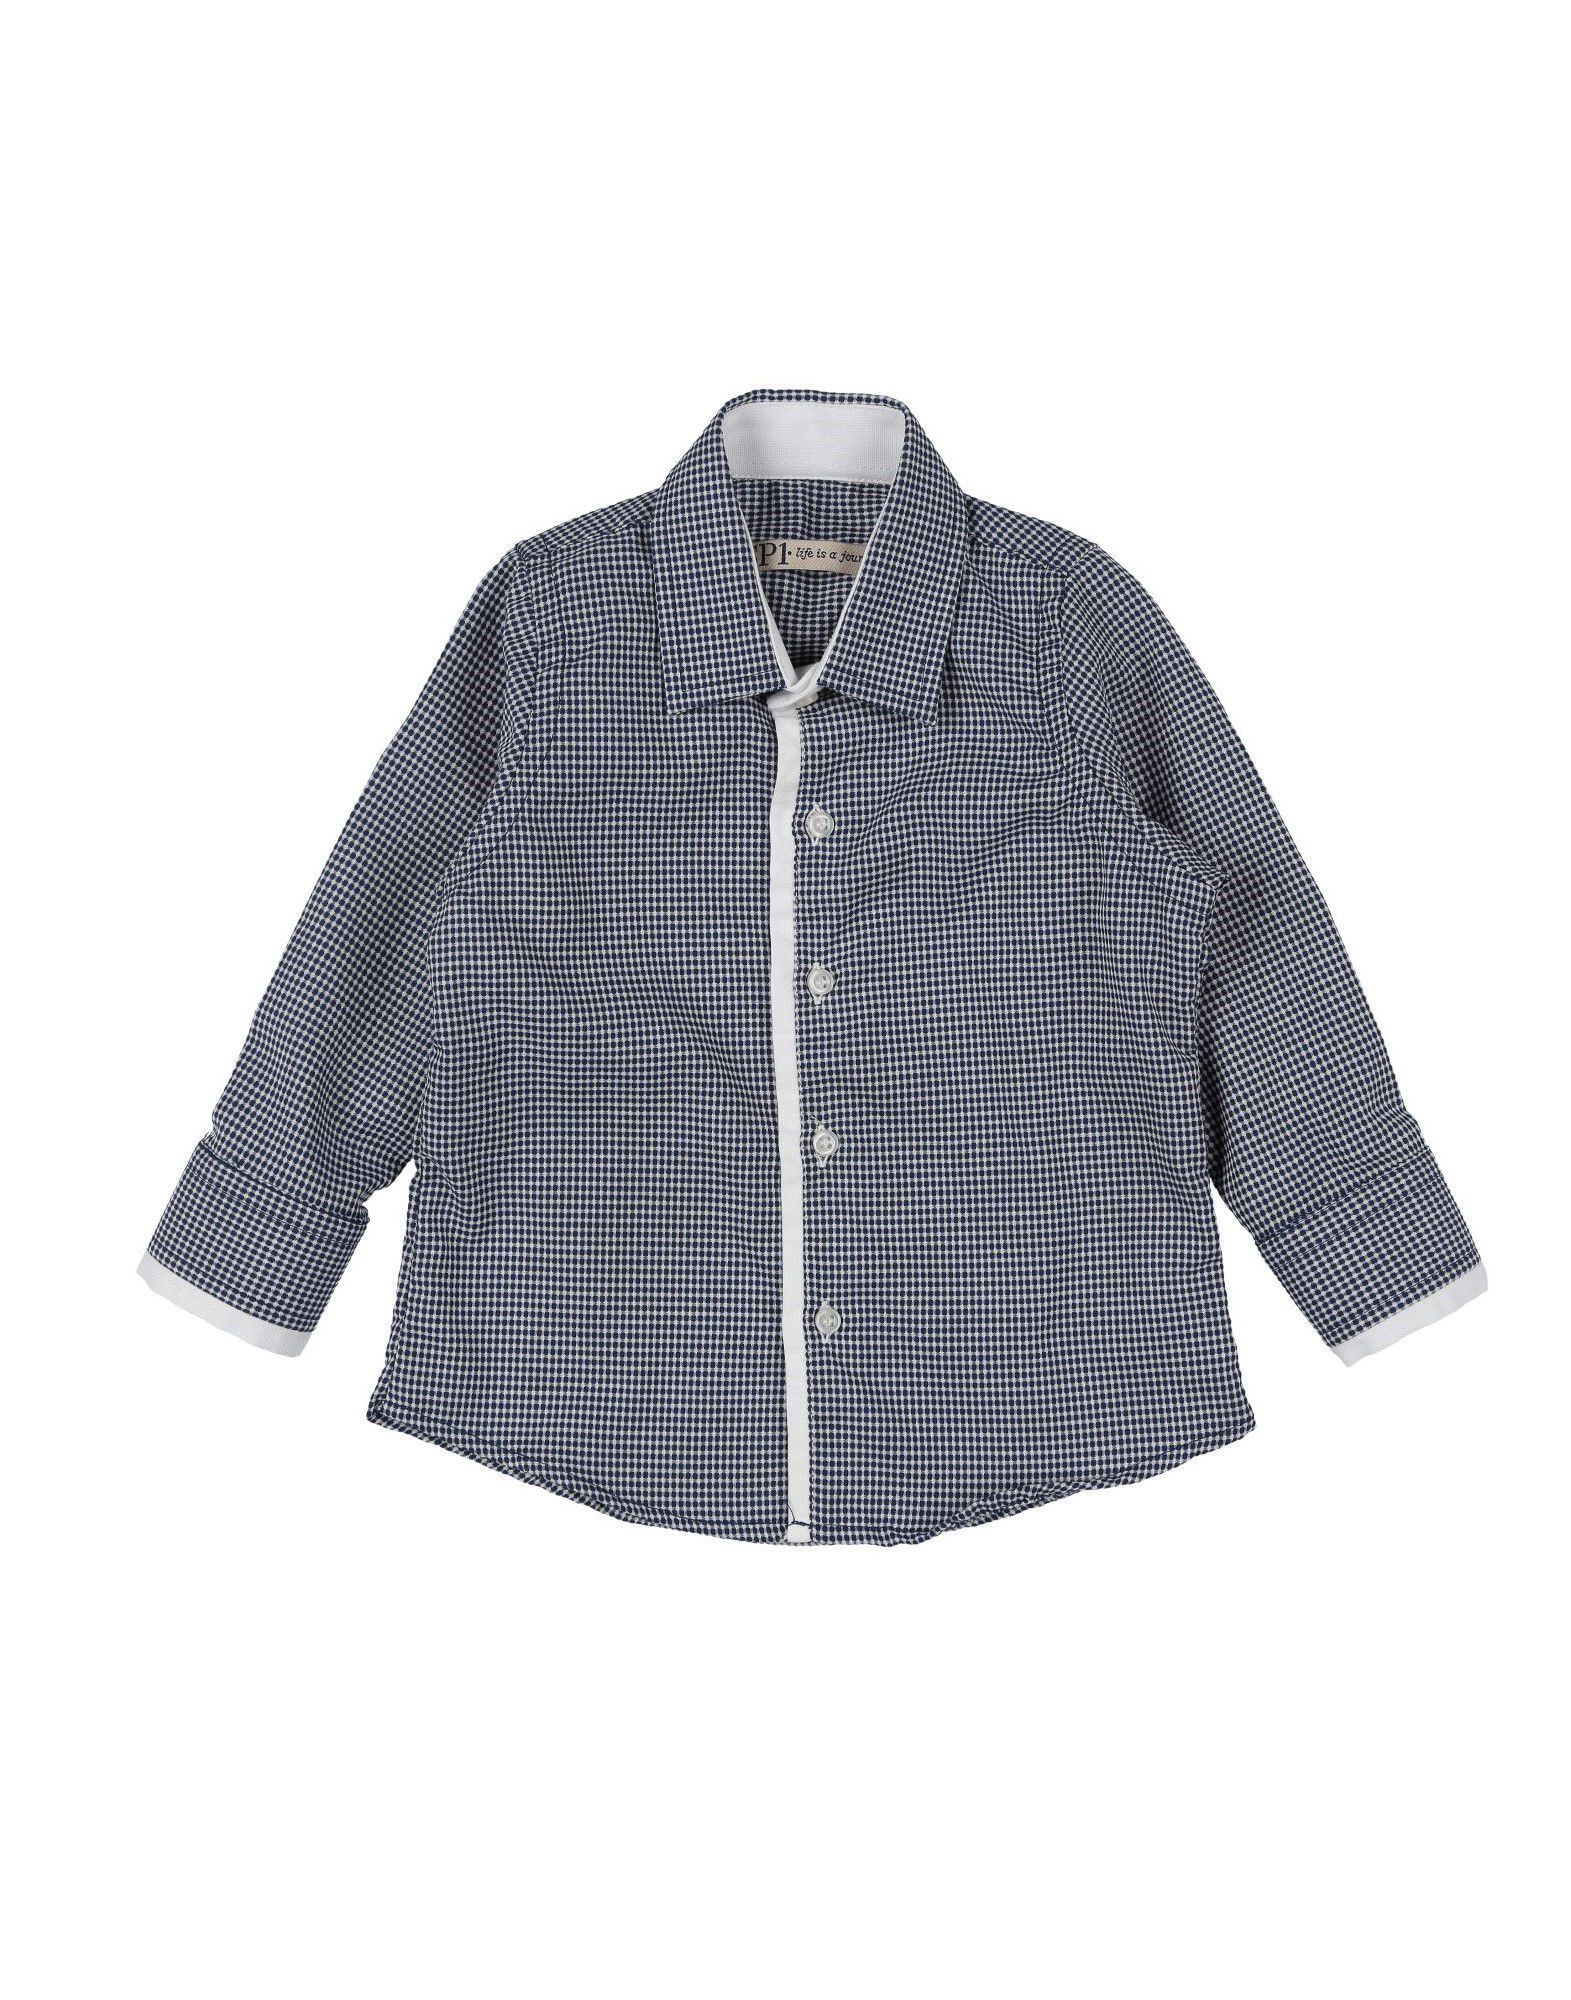 Sp1 Kids' Shirts In Blue